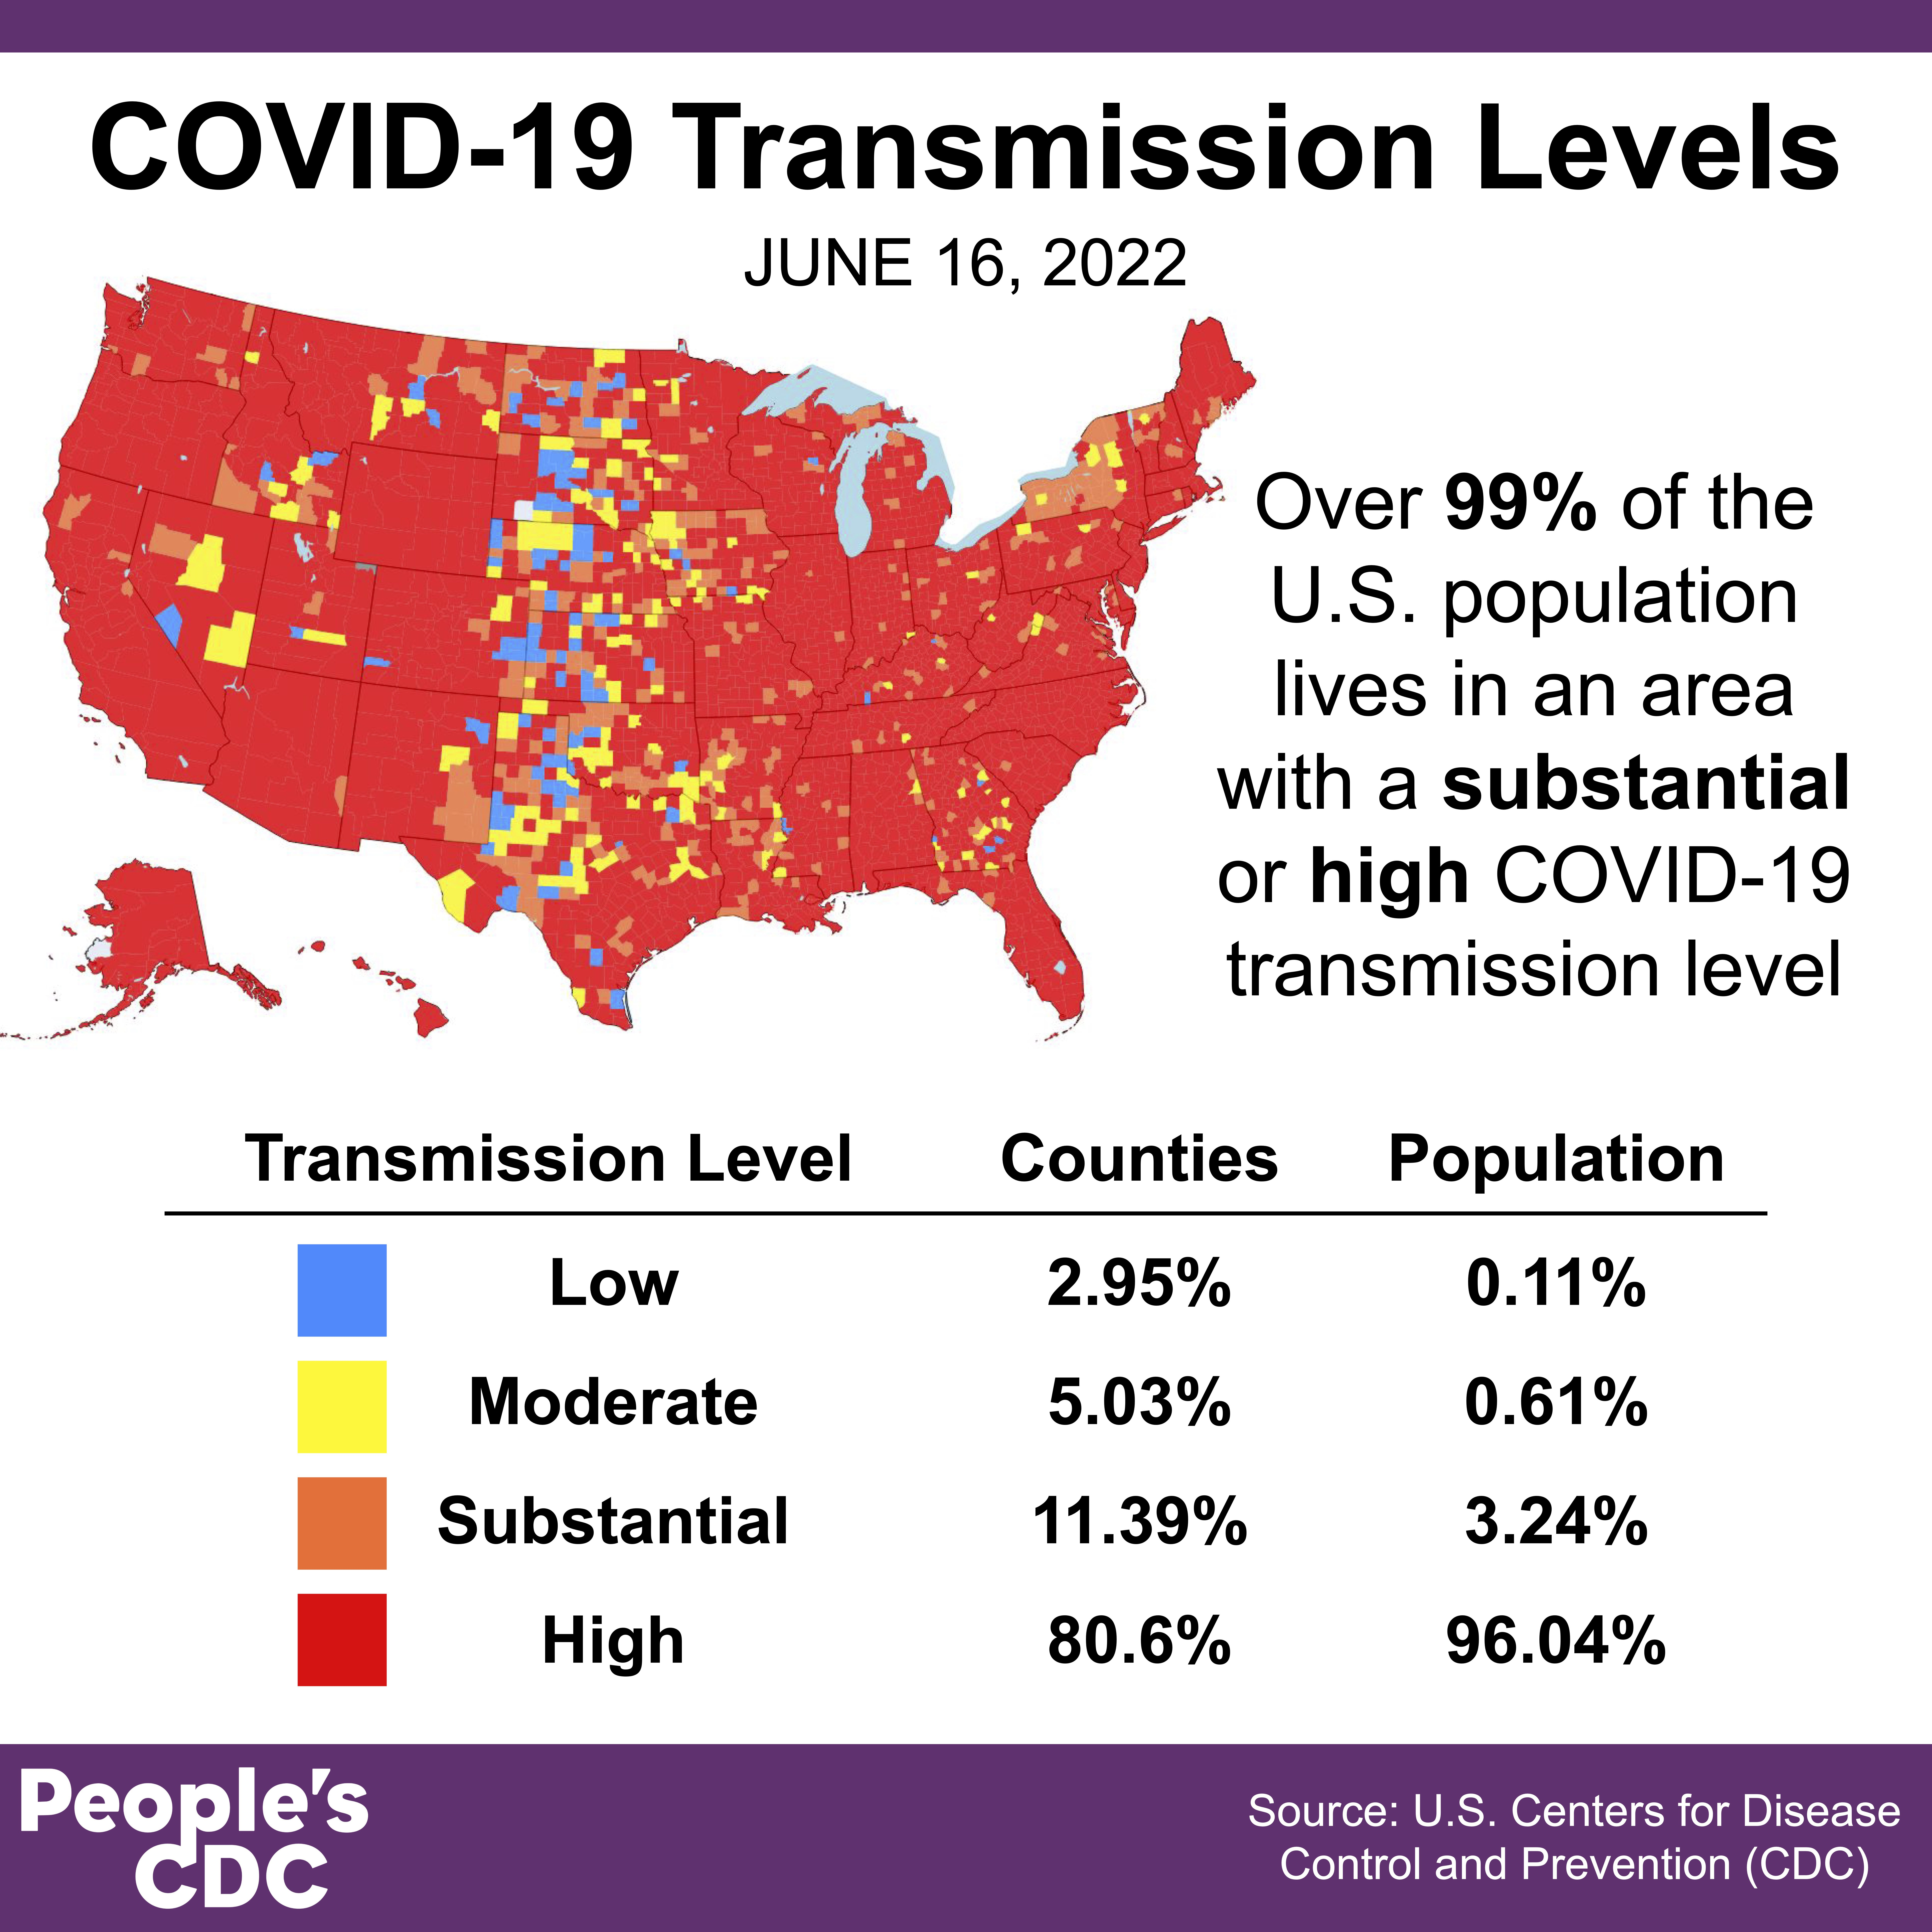 This map and corresponding table show COVID community transmission in the US by county. Most of the US map is red, indicating high levels at 96 percent of the population or 80 percent of counties. An additional 3.2 percent of the population or 11 percent of counties are in areas with substantial transmission, in orange. Nearly 99 percent of the US population lives in an area with high or substantial COVID transmission. Only the middle vertical line of the contiguous US--the Dakotas, Nebraska, Kansas, Oklahoma, and northern Texas--show a higher concentration of moderate and low transmission, in yellow and blue, respectively. The graphic is visualized by the People’s CDC and the data are from the CDC.